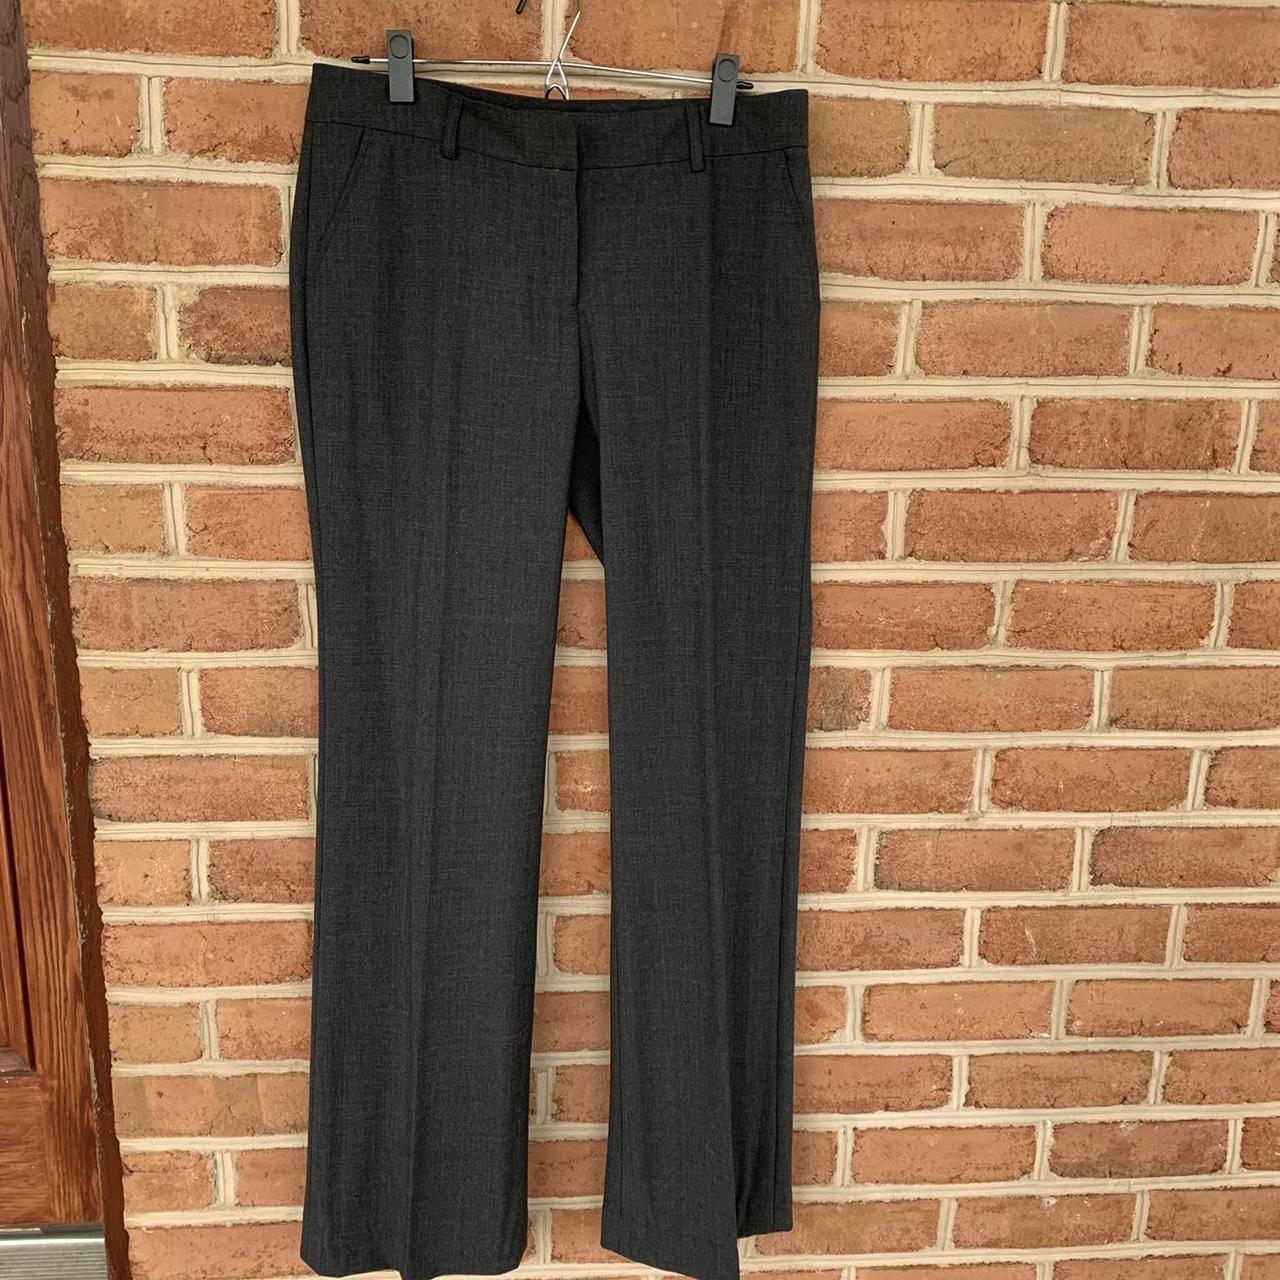 item listed by thriftwithce